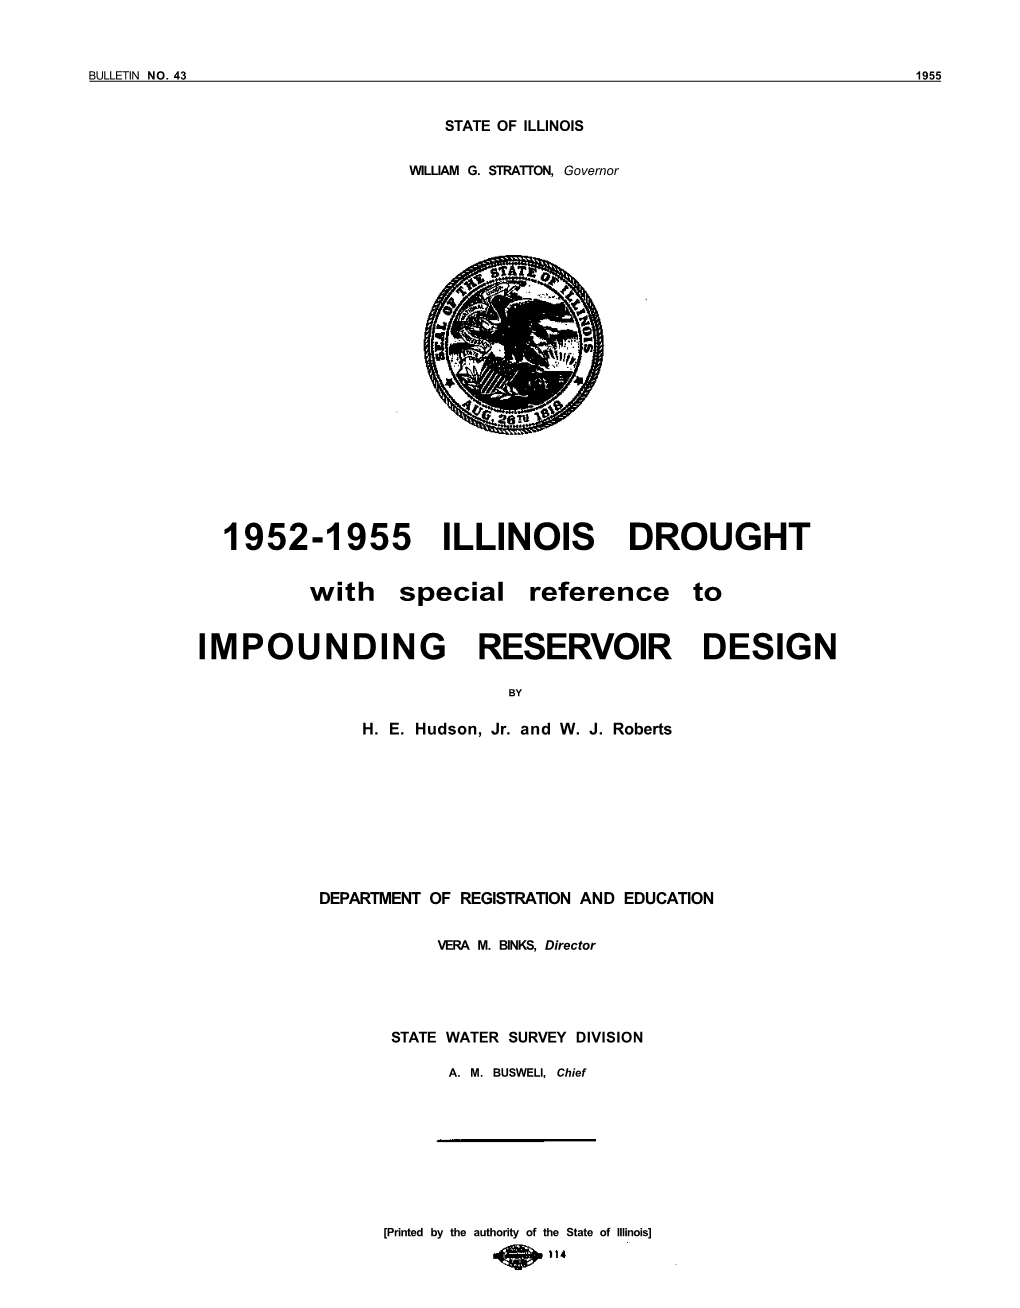 1952-1955 ILLINOIS DROUGHT with Special Reference to IMPOUNDING RESERVOIR DESIGN